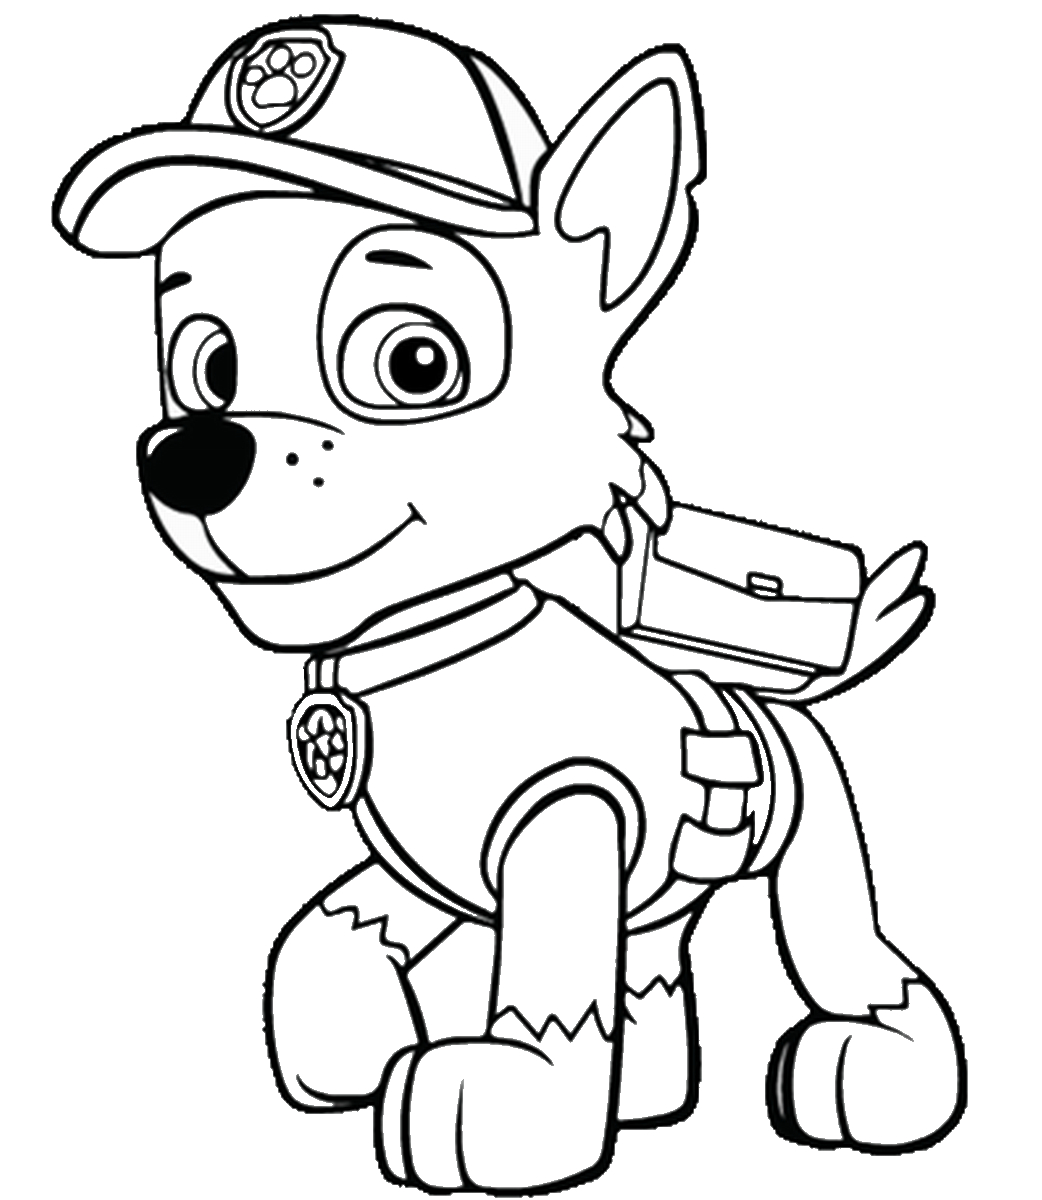 Marshall Paw Patrol Coloring Page Paw Patrol Coloring Pages Sheets